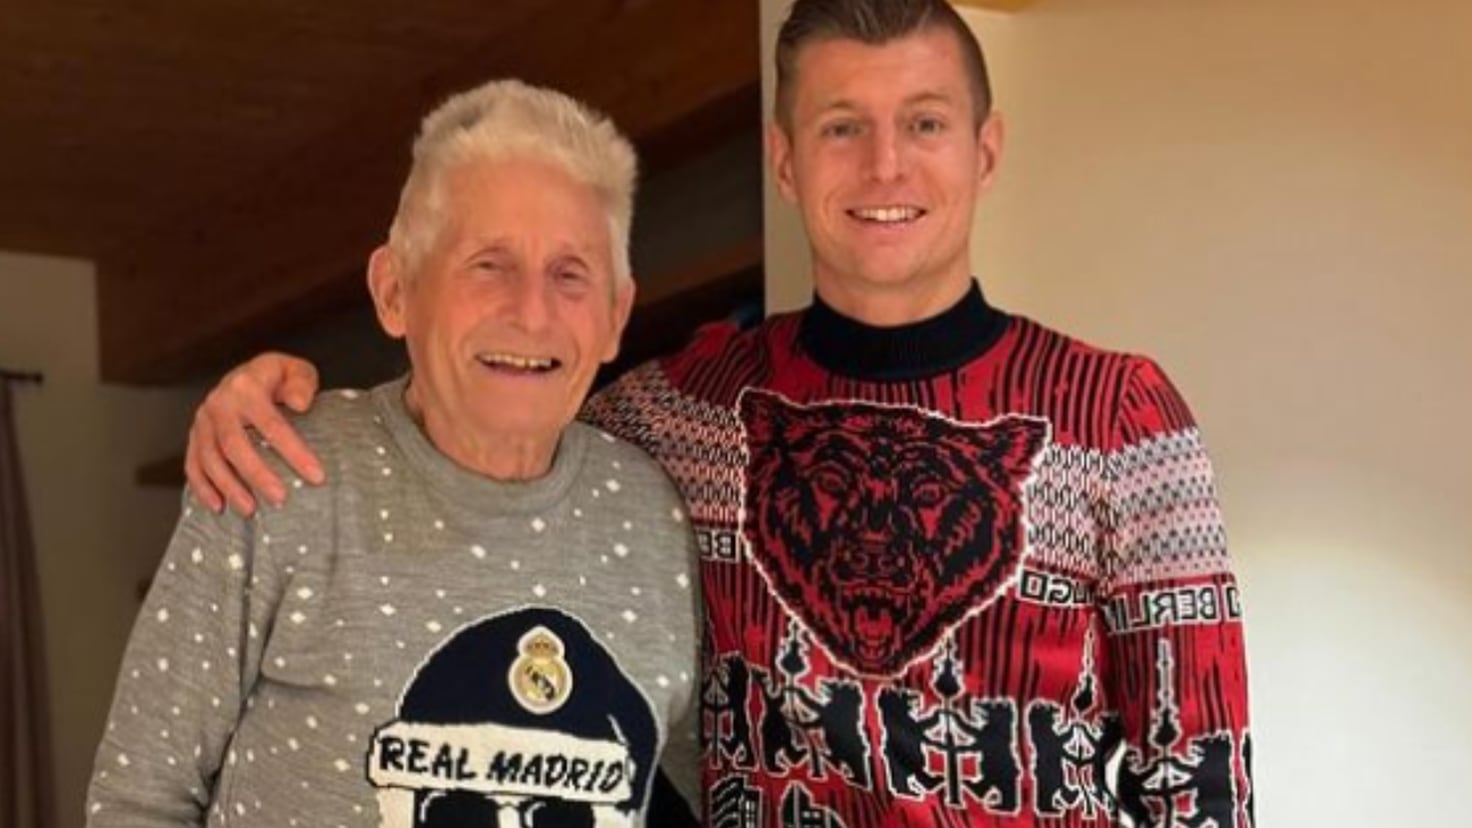 Real Madrid Christmas: trips to Los Angeles, Real Madrid grandparents and problems with English
